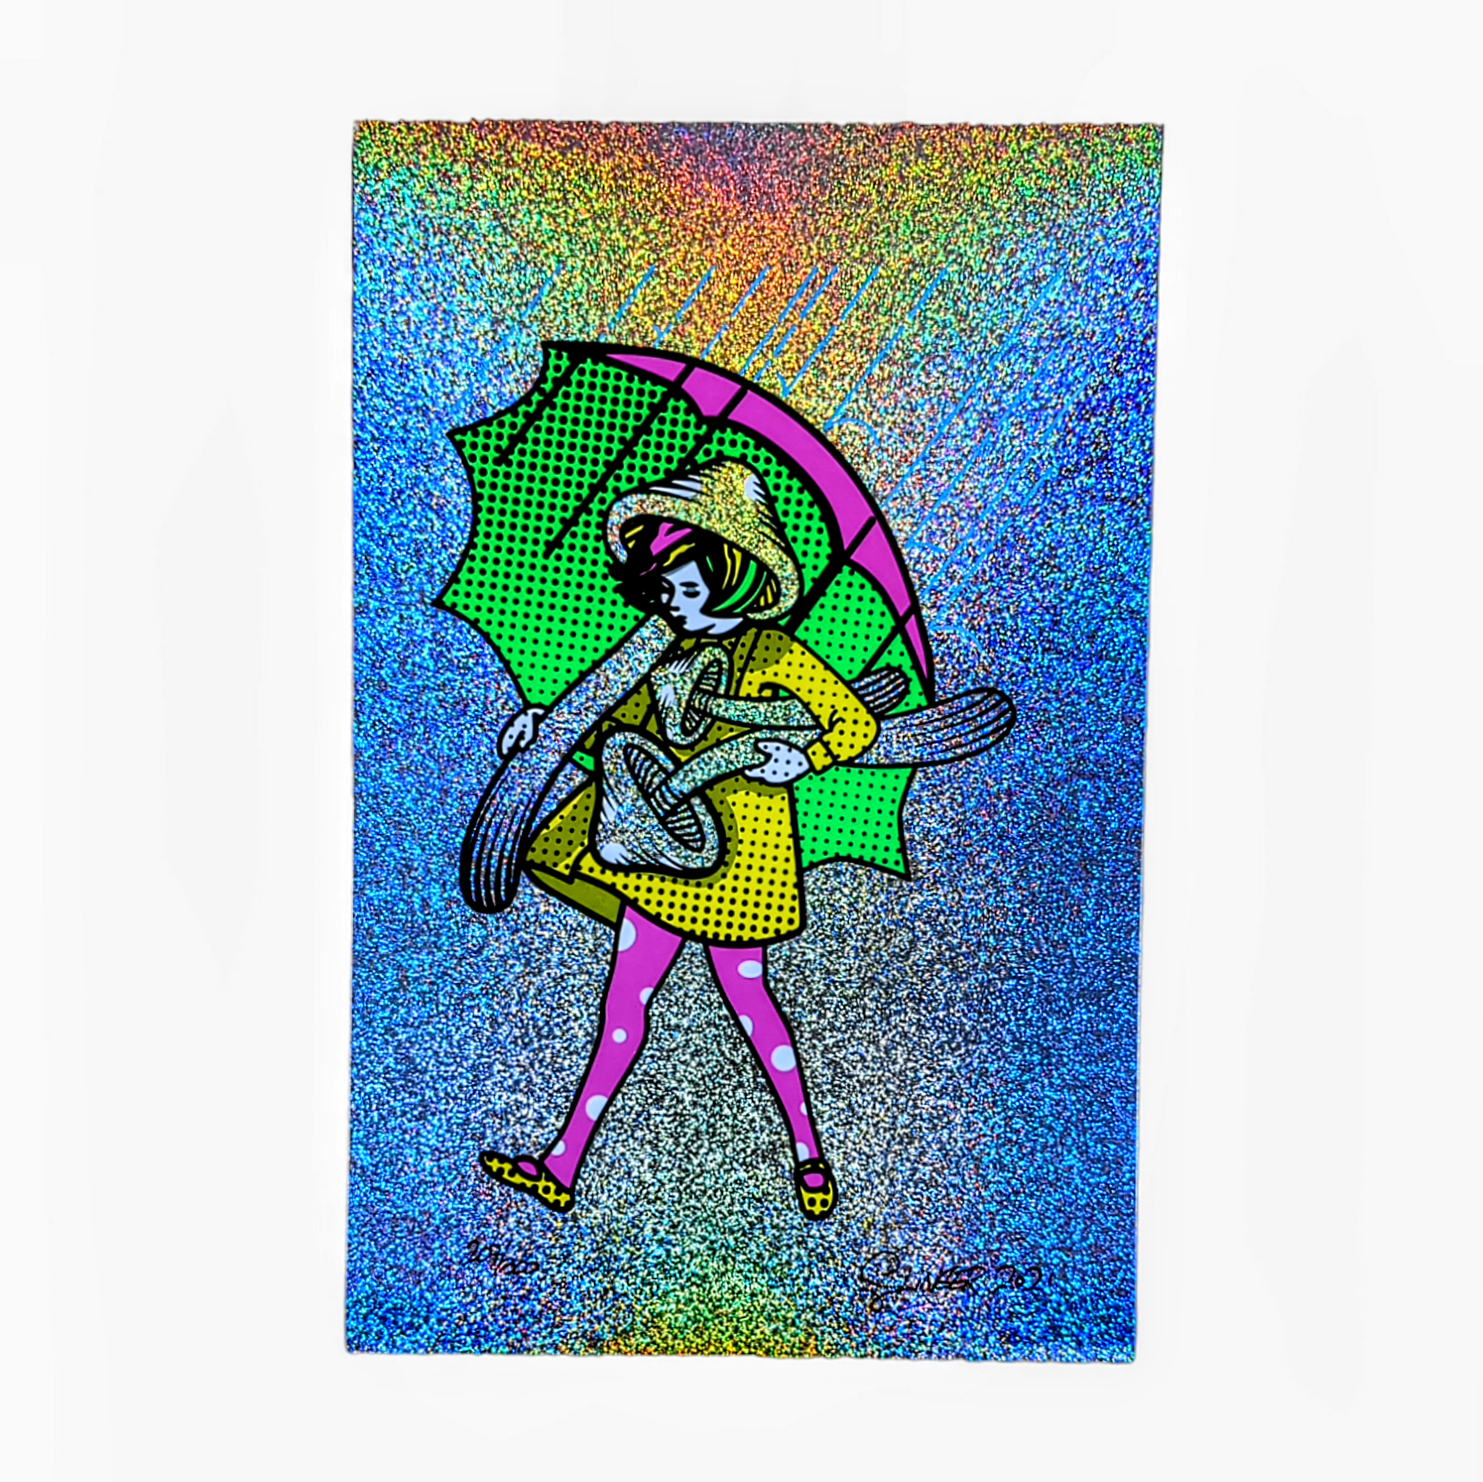 Slinger x Pyroscopic Neon Shroom Girl, 2020 Archival Pigment Print on Holographic Sparkle Foil 11 x 17 in Edition of 300  Signed, Numbered + Dated by the artists